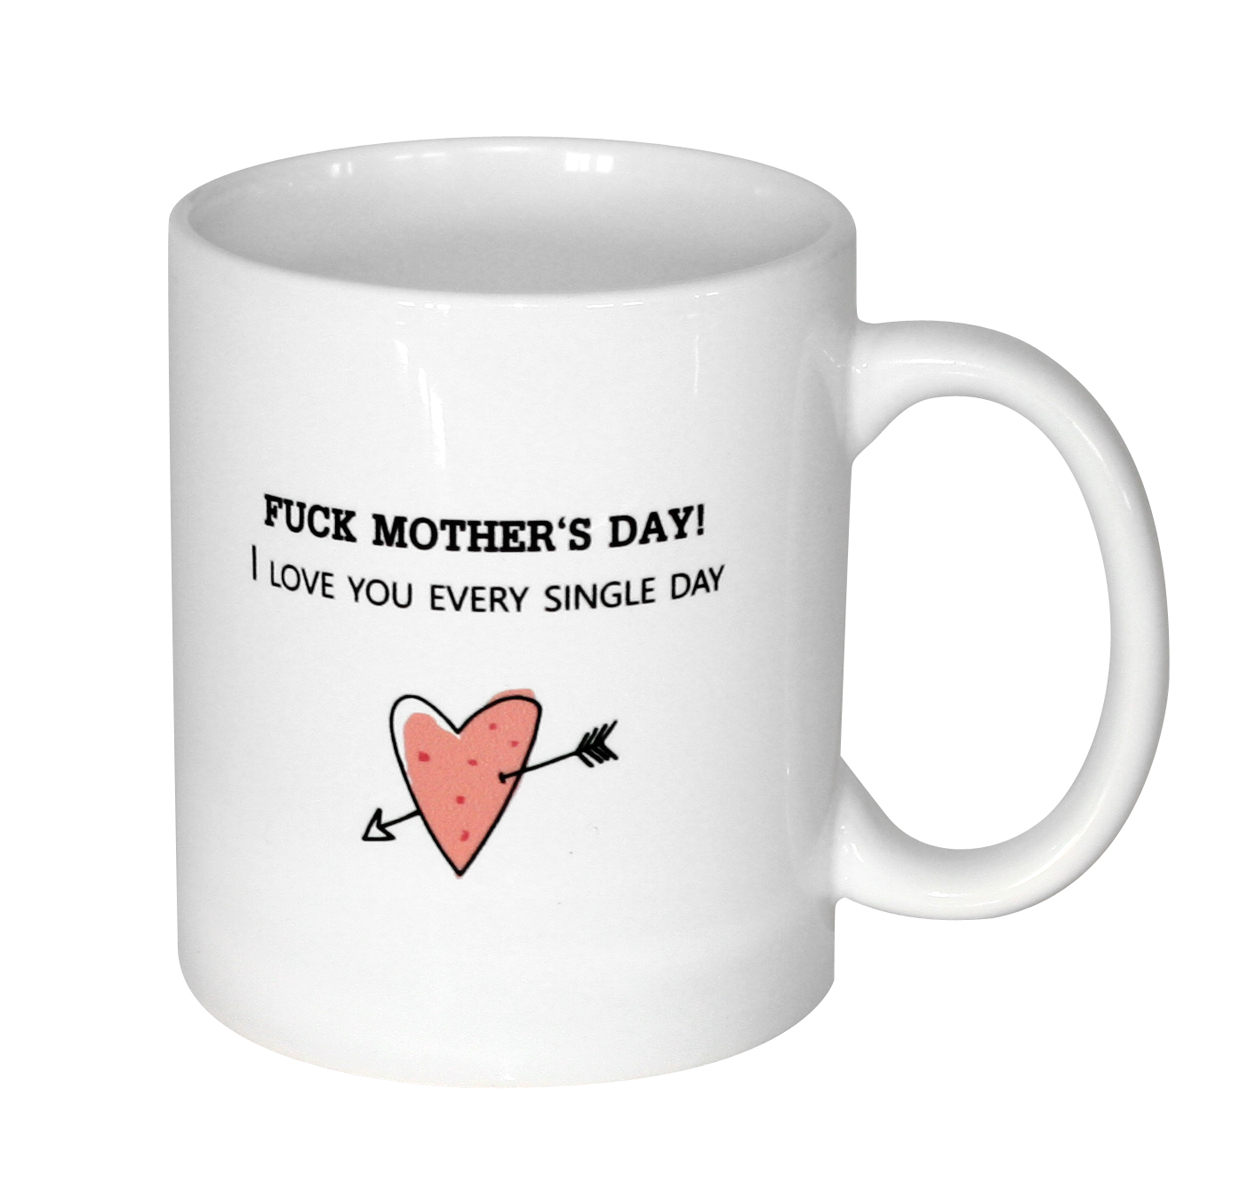 Mothers Day Mugs, Mother Of The Fucking Year